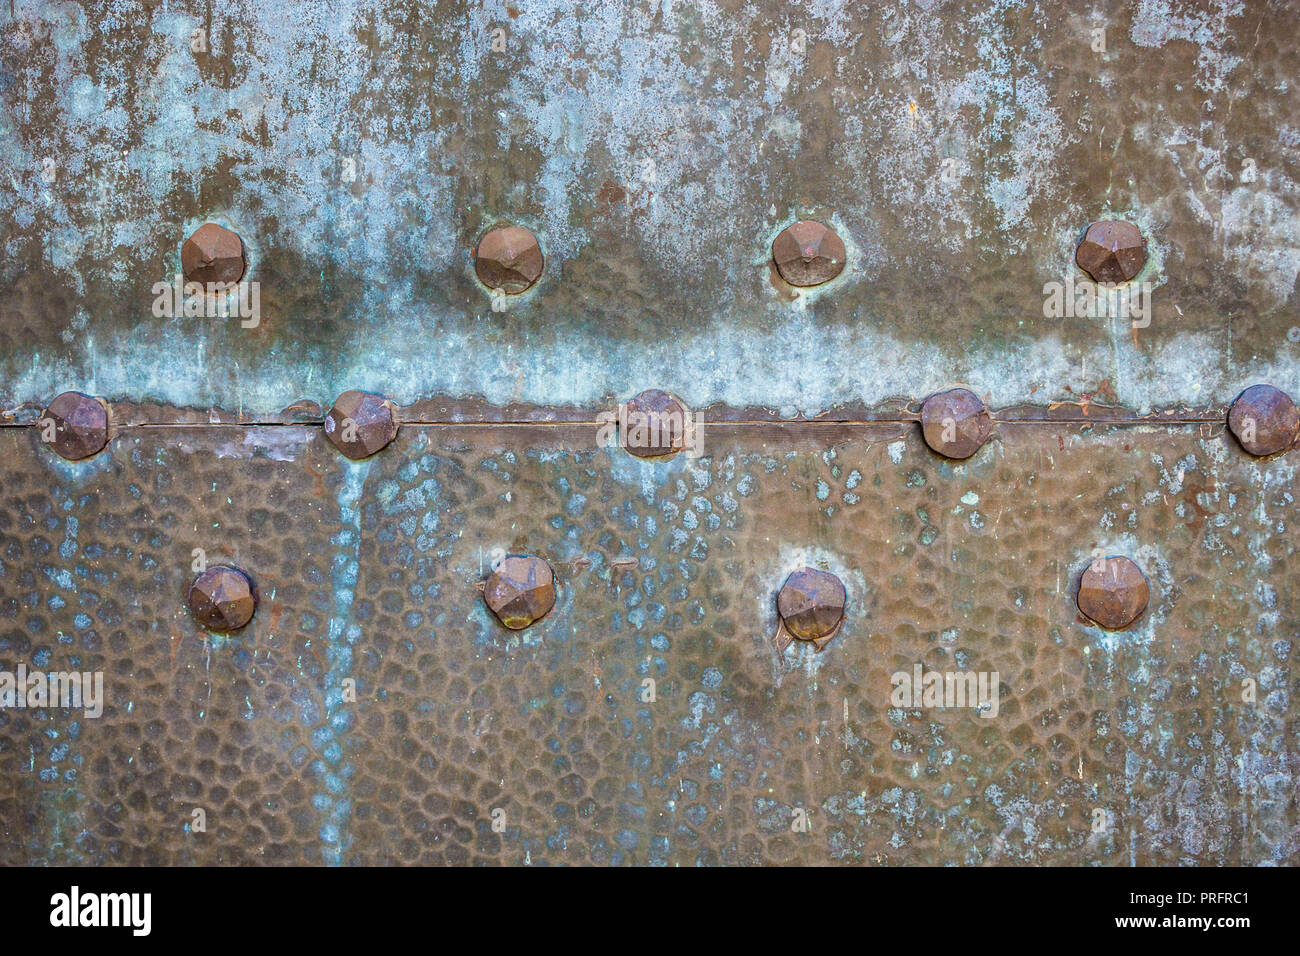 Texture of old weathered metal door with rivets. Vintage washed out rusty metal. Stock Photo